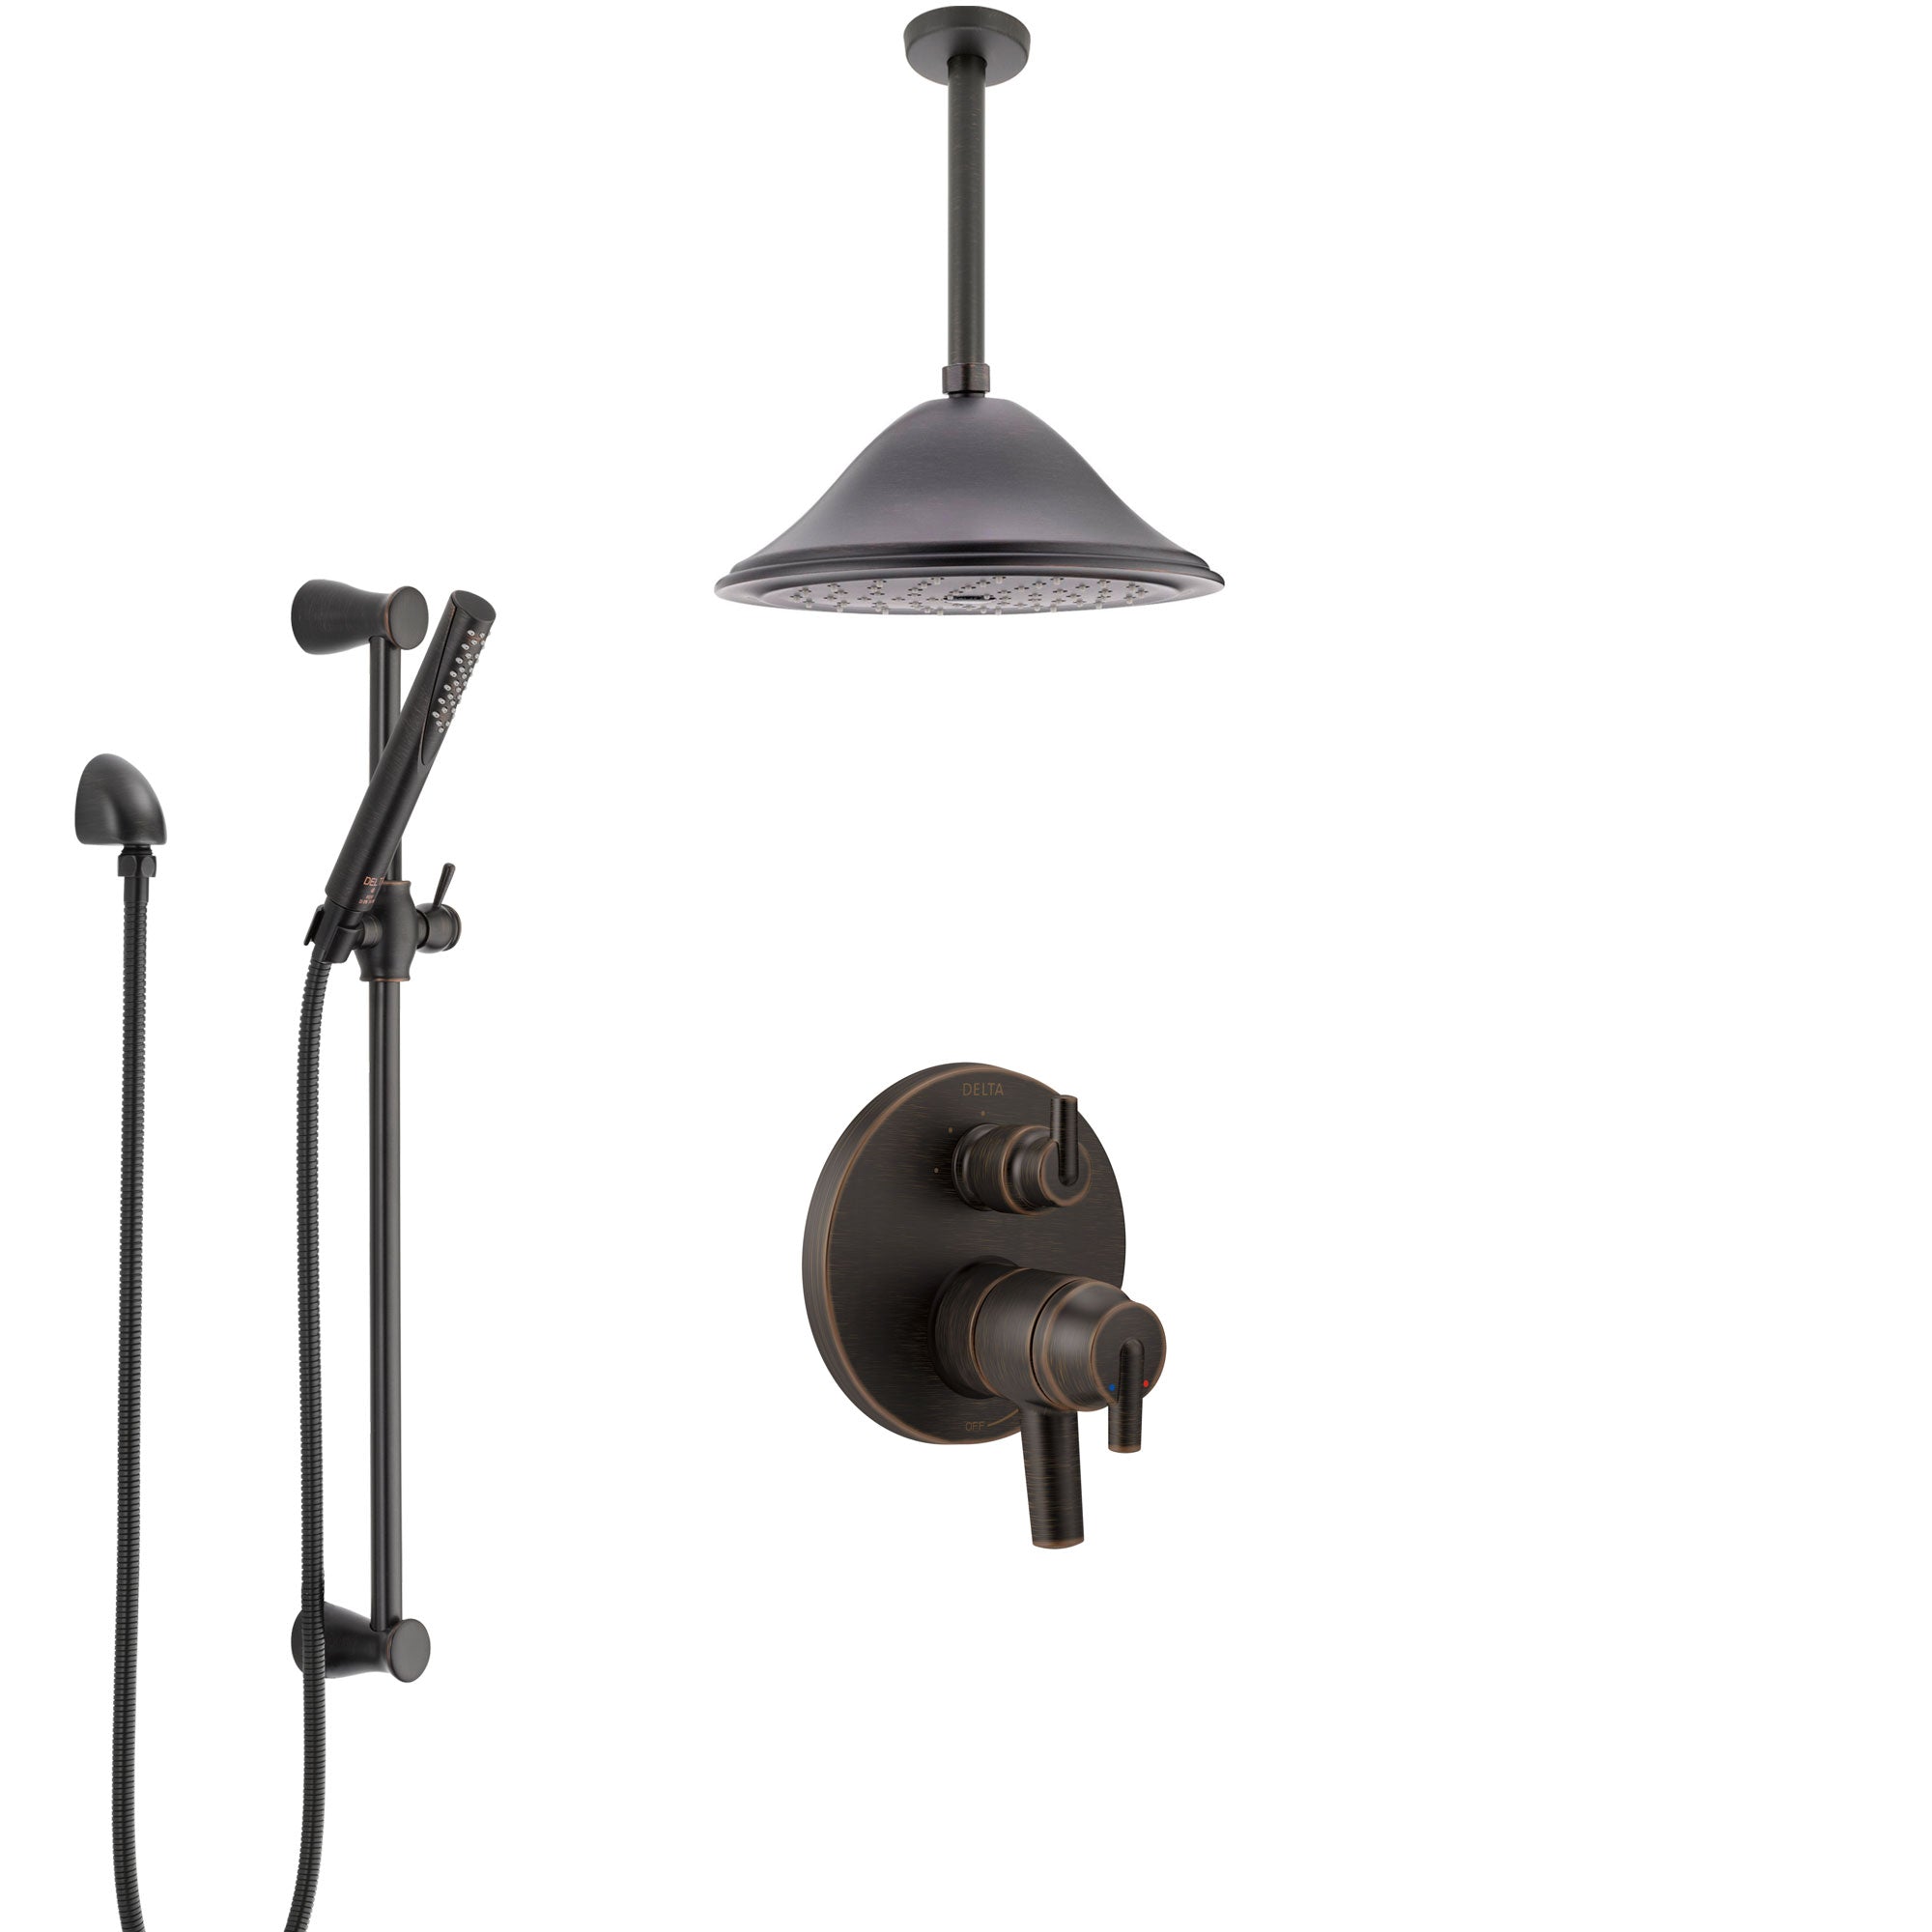 Delta Trinsic Venetian Bronze Shower System with Dual Control Handle, Integrated Diverter, Ceiling Mount Showerhead, and Hand Shower SS27859RB8